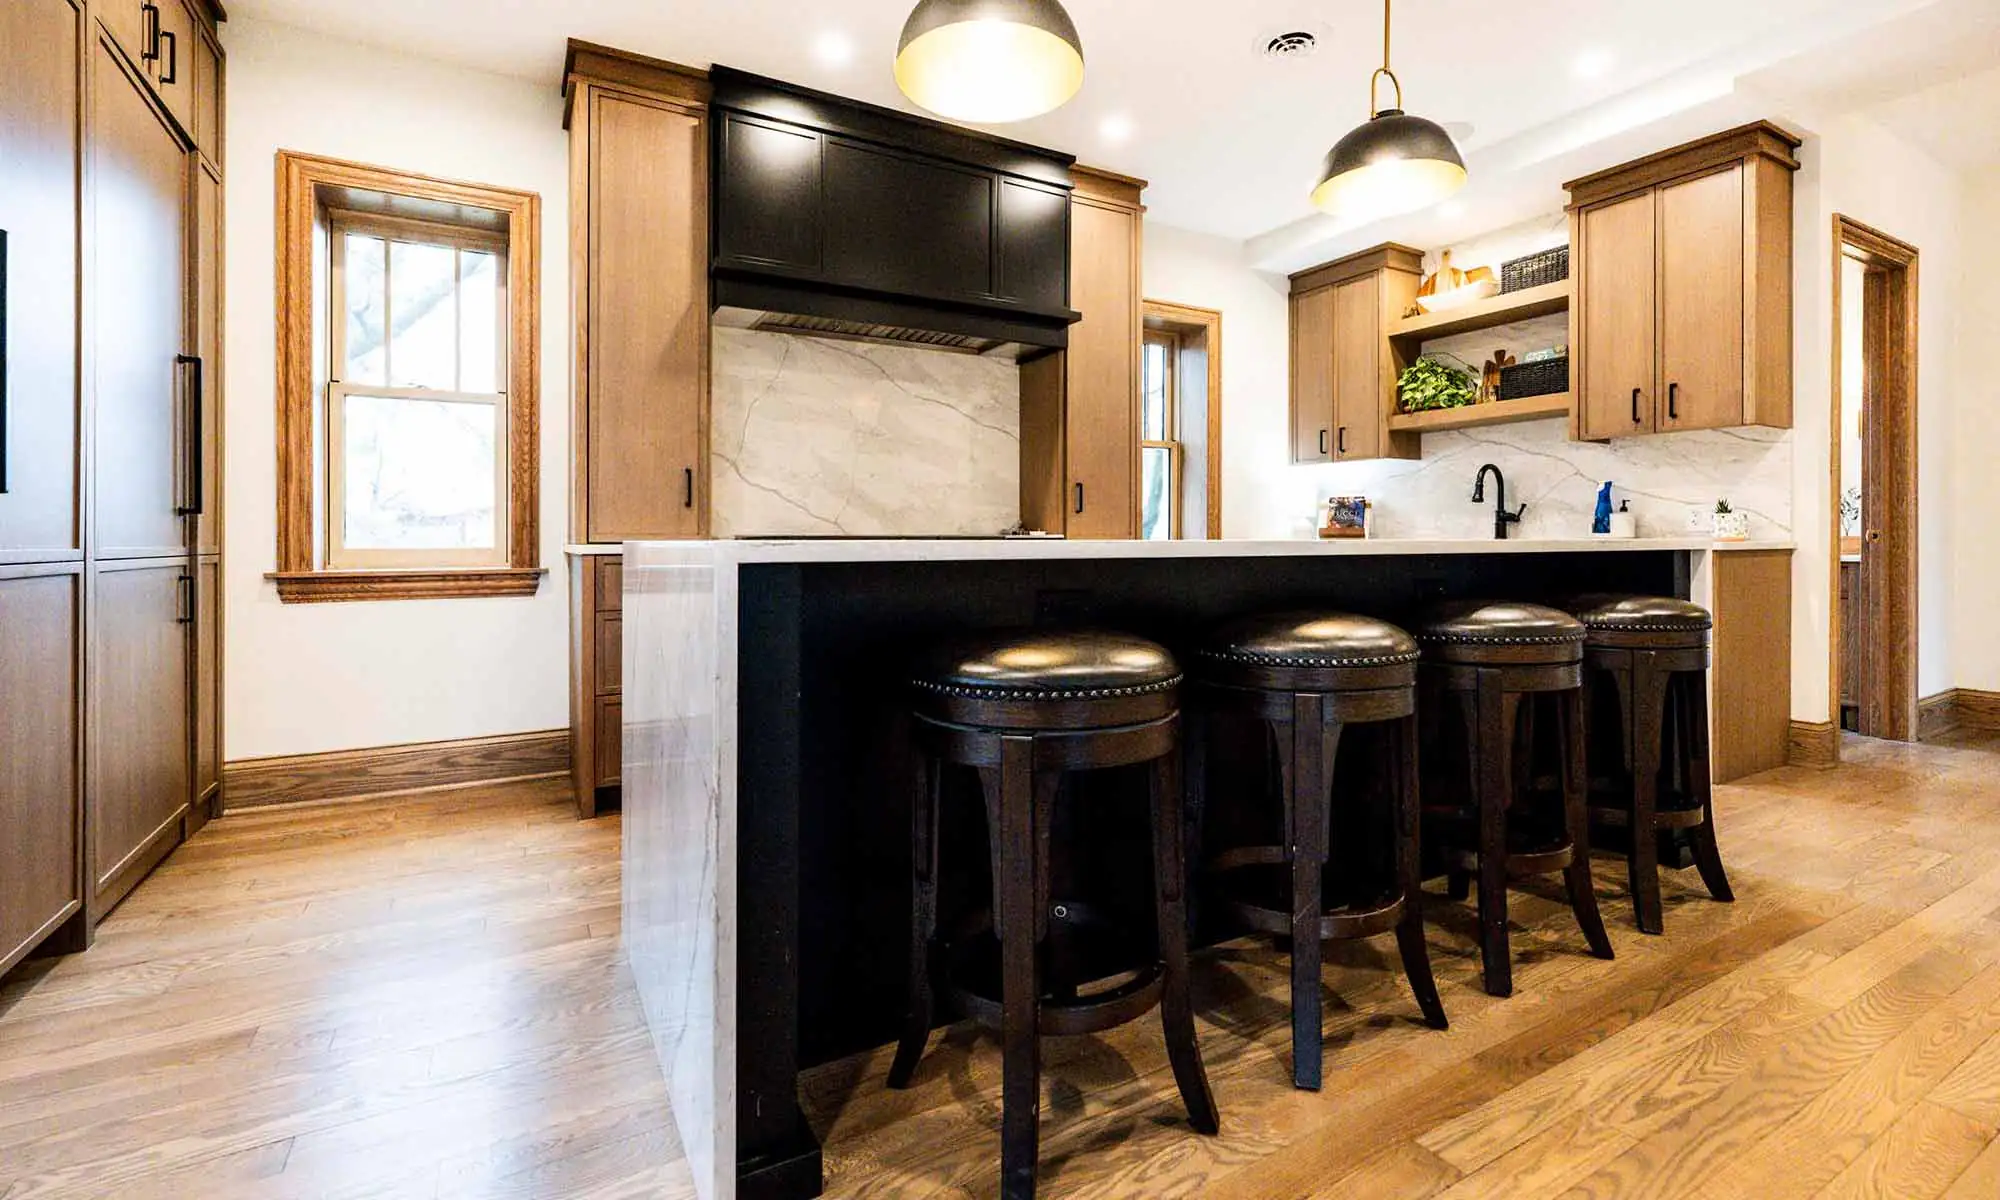 view of luxury kitchen remodel with windows flanking large range wall and white oak cabinetry and island bar seating